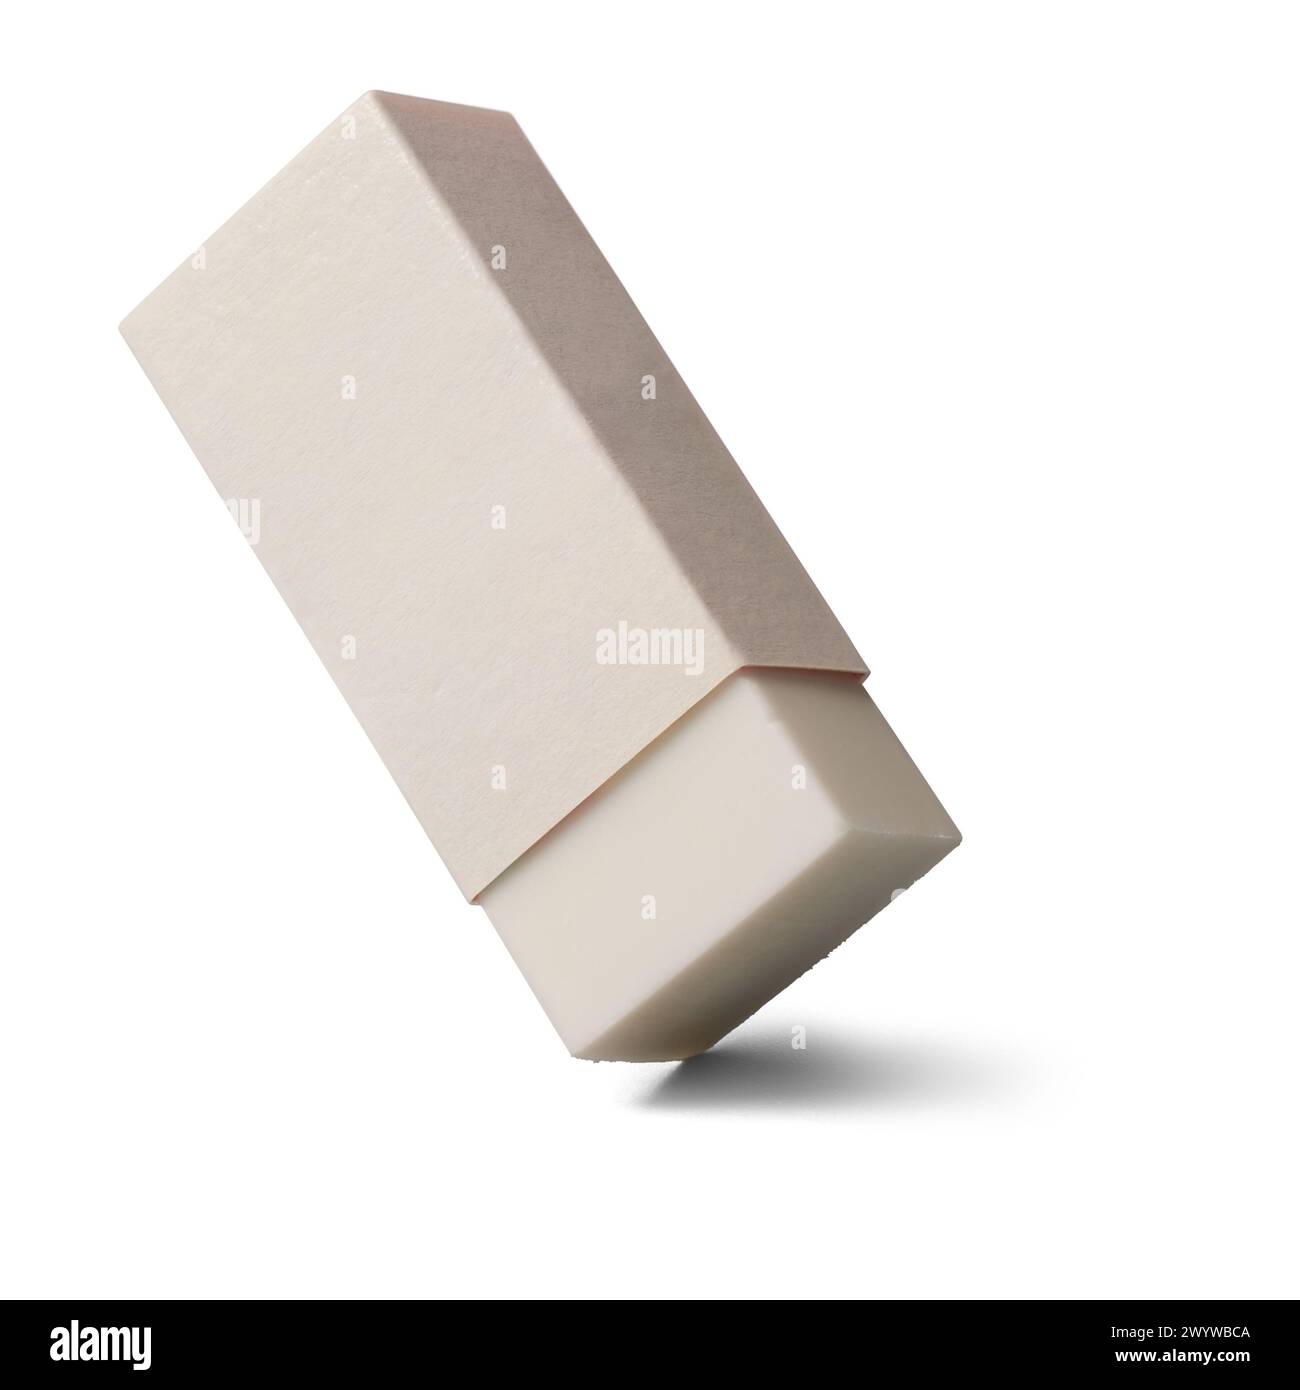 rubber eraser isolated white background, traditional rectangular shaped block eraser made from natural rubber, stationery school supplies mock-up Stock Photo